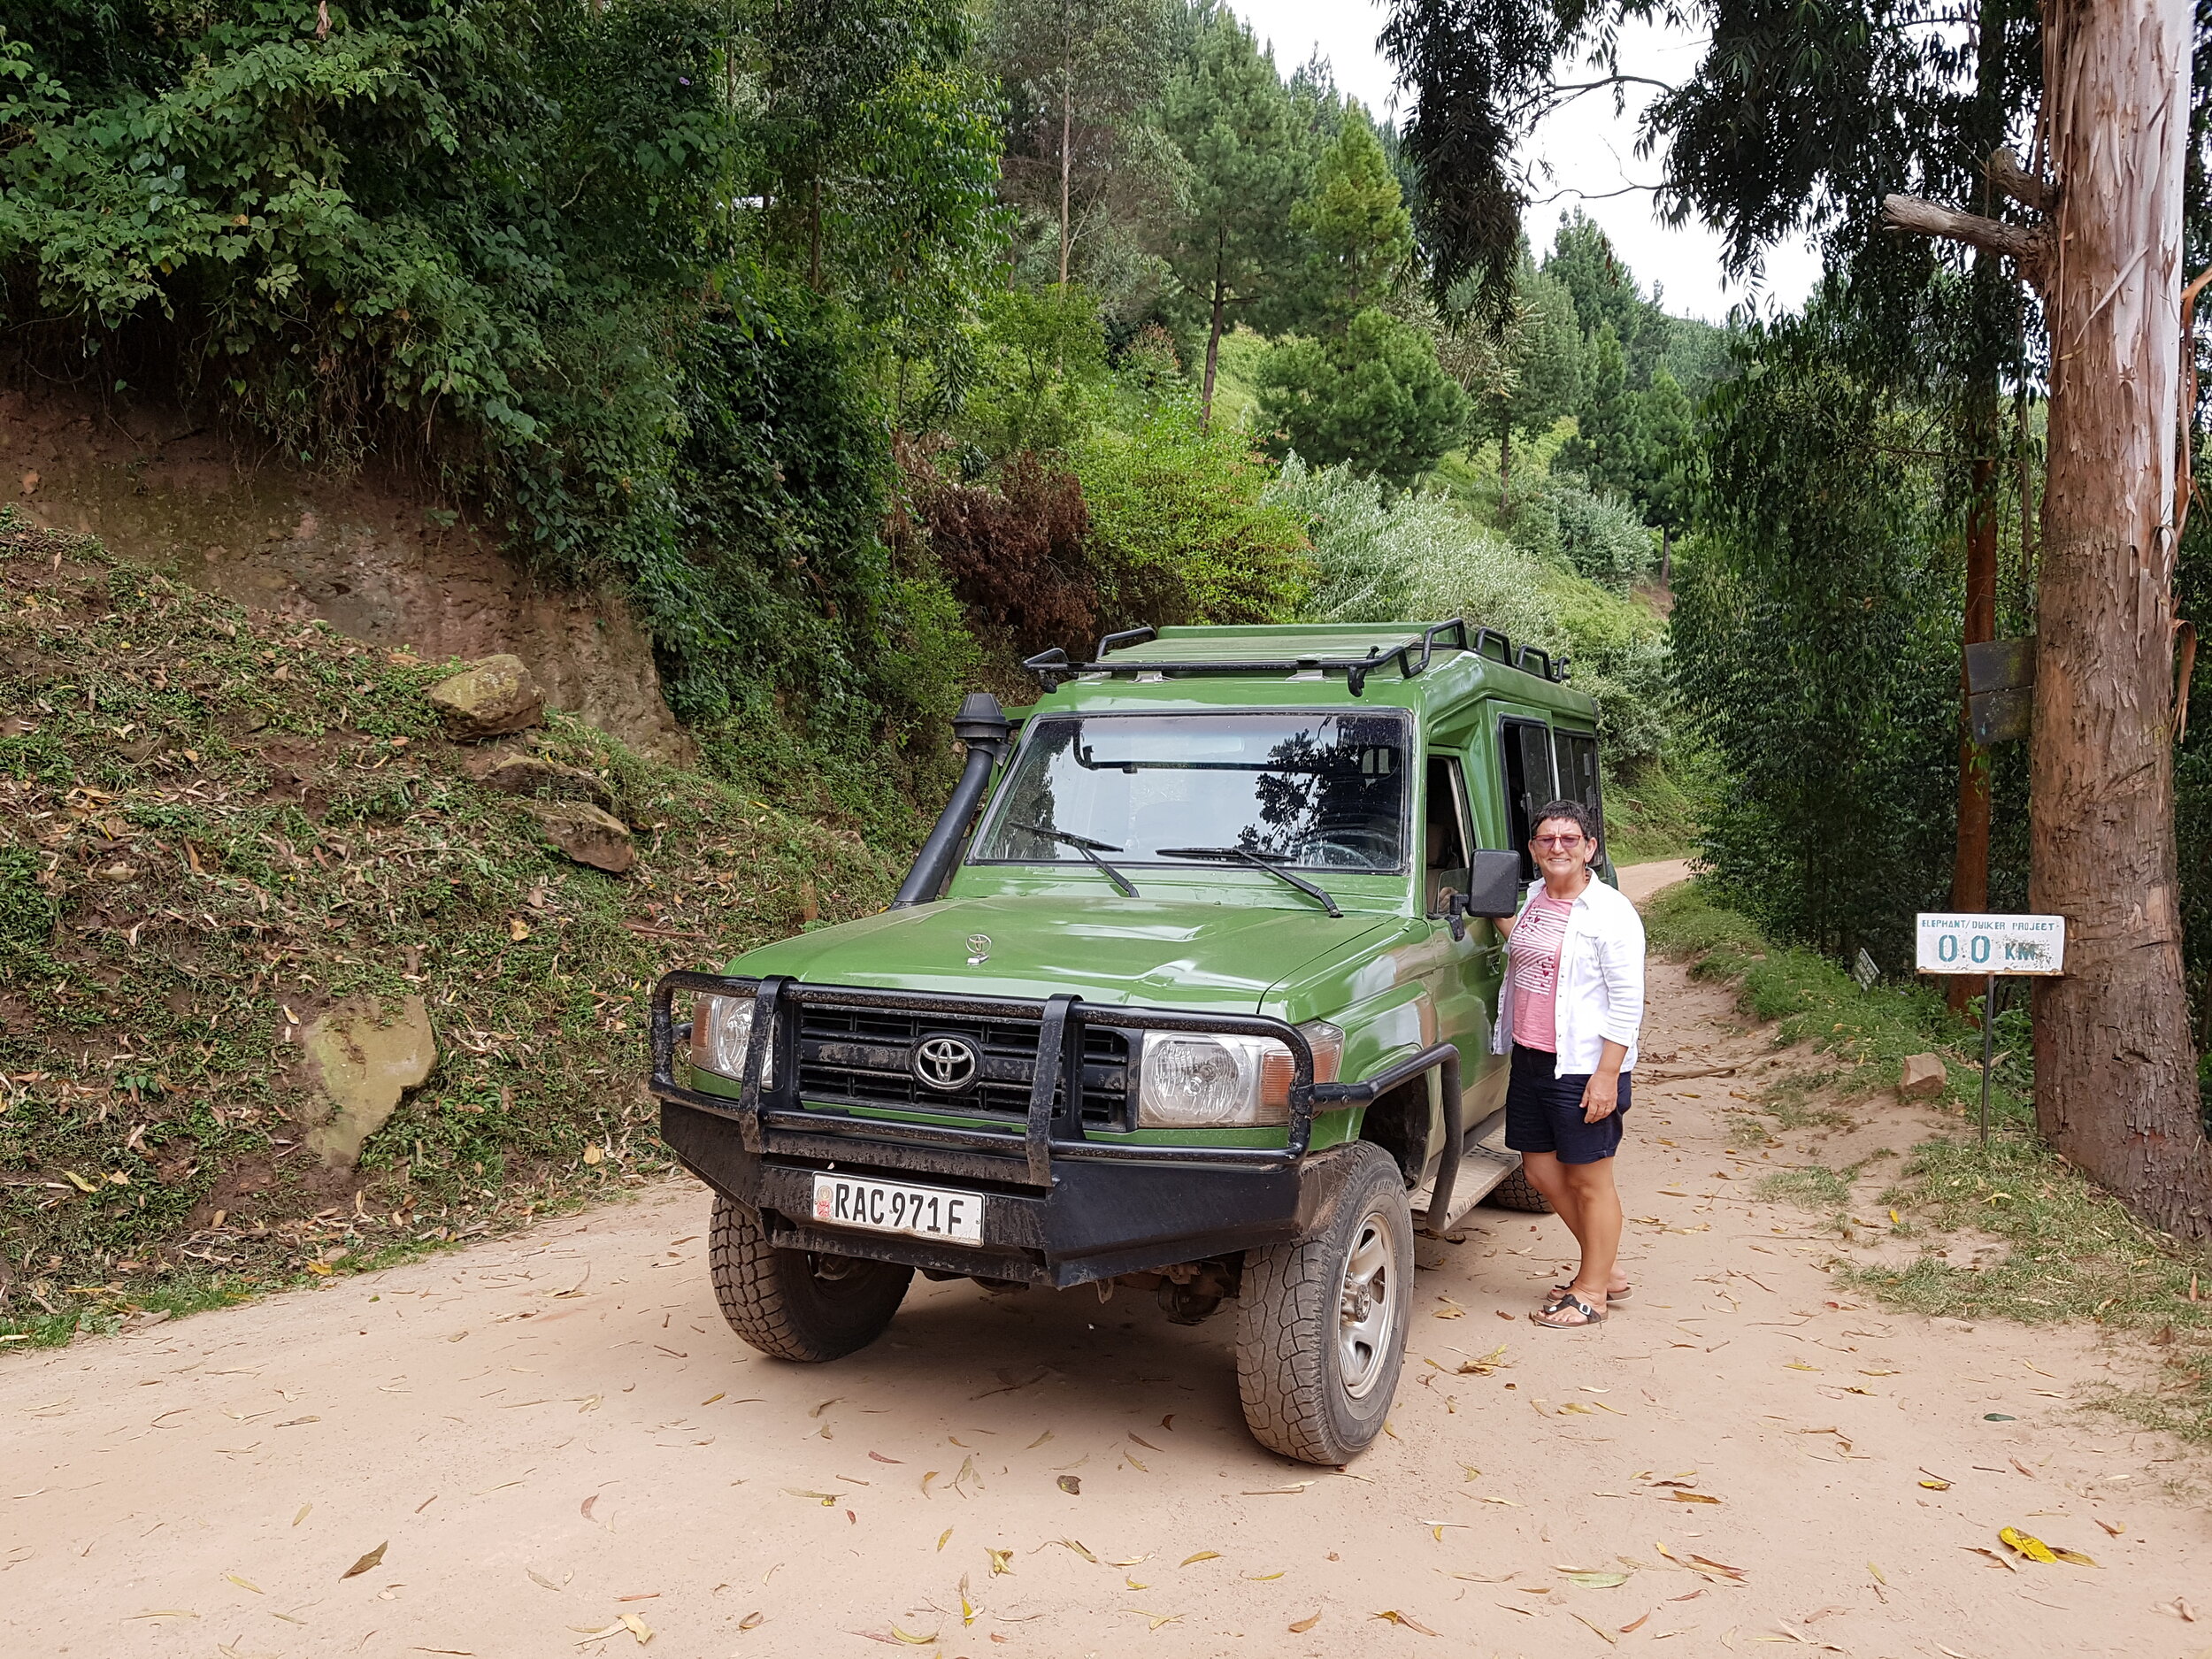 A 4x4 vehicle is a must in the Bwindi forest area, Uganda